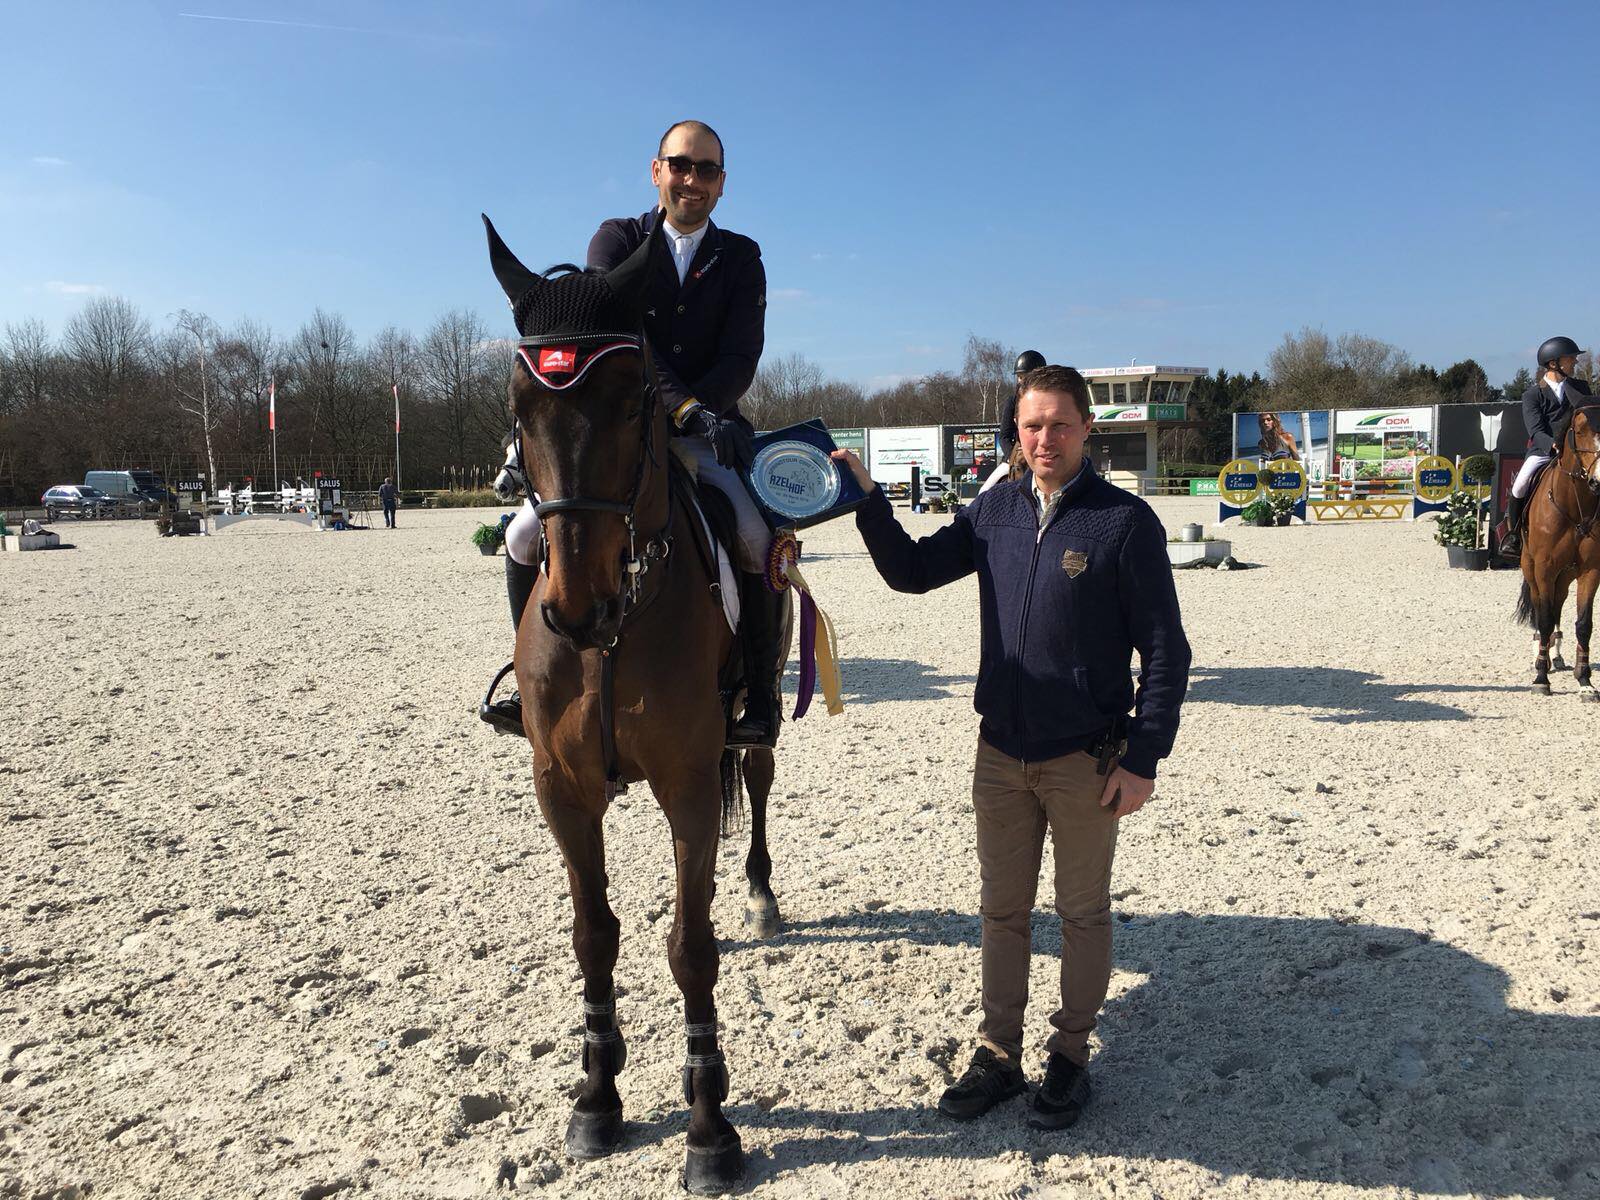 British riders keep on ruling the show in CSI2* London